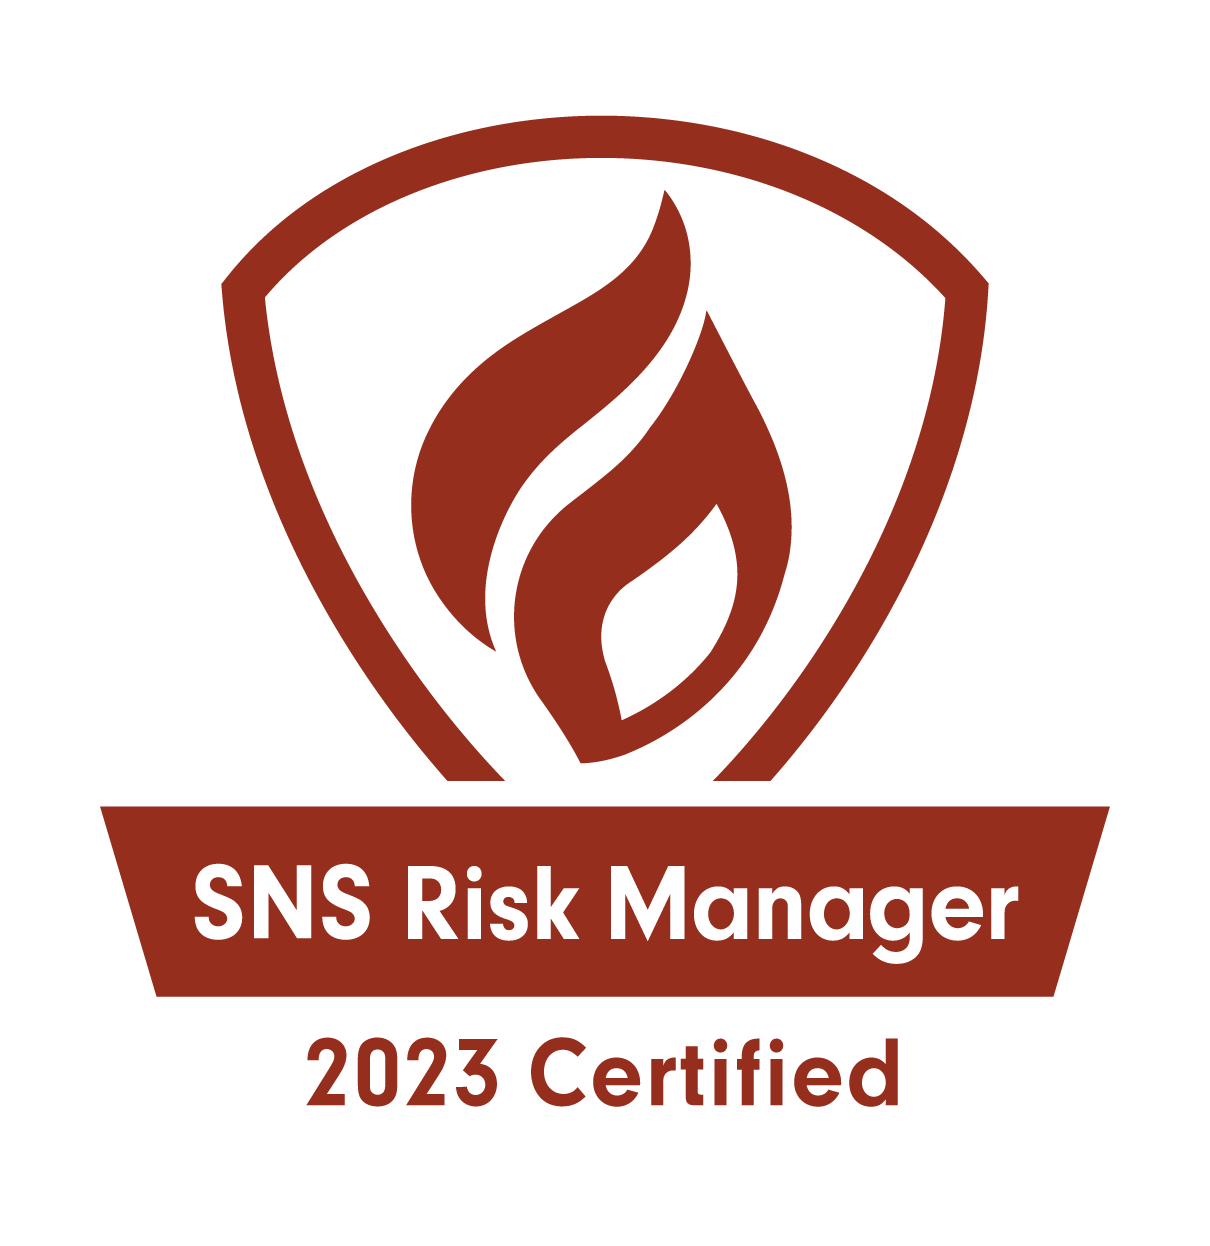 SNS Risk Manager